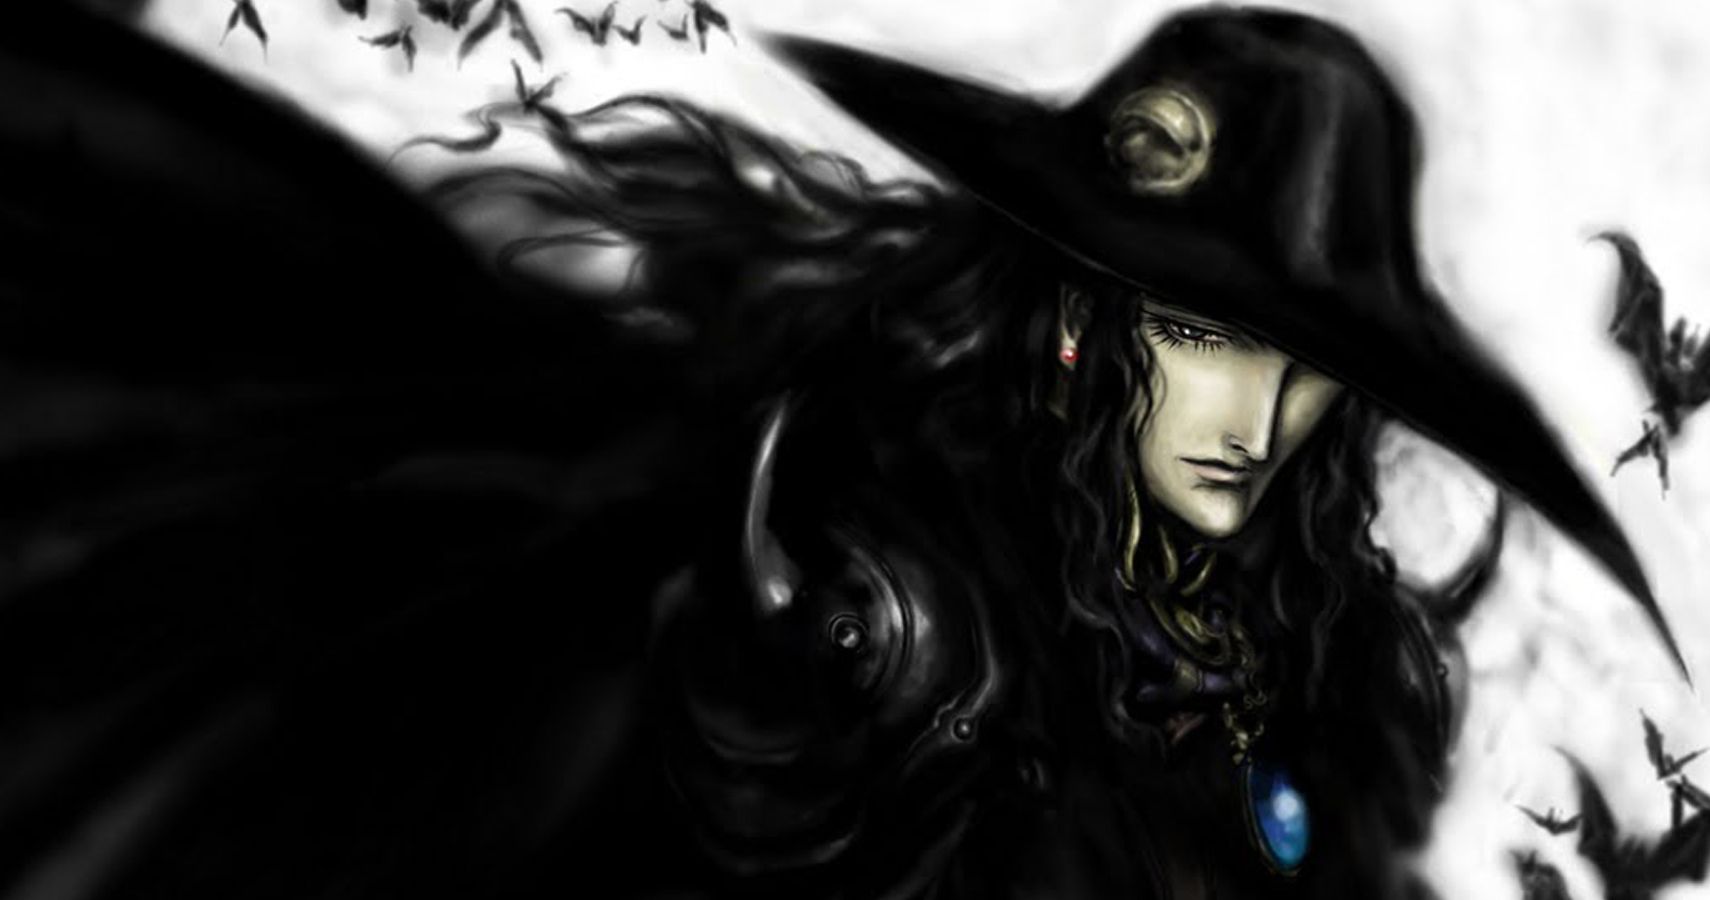 Vampire Hunter D: The 10 Scariest Moments In The Movies